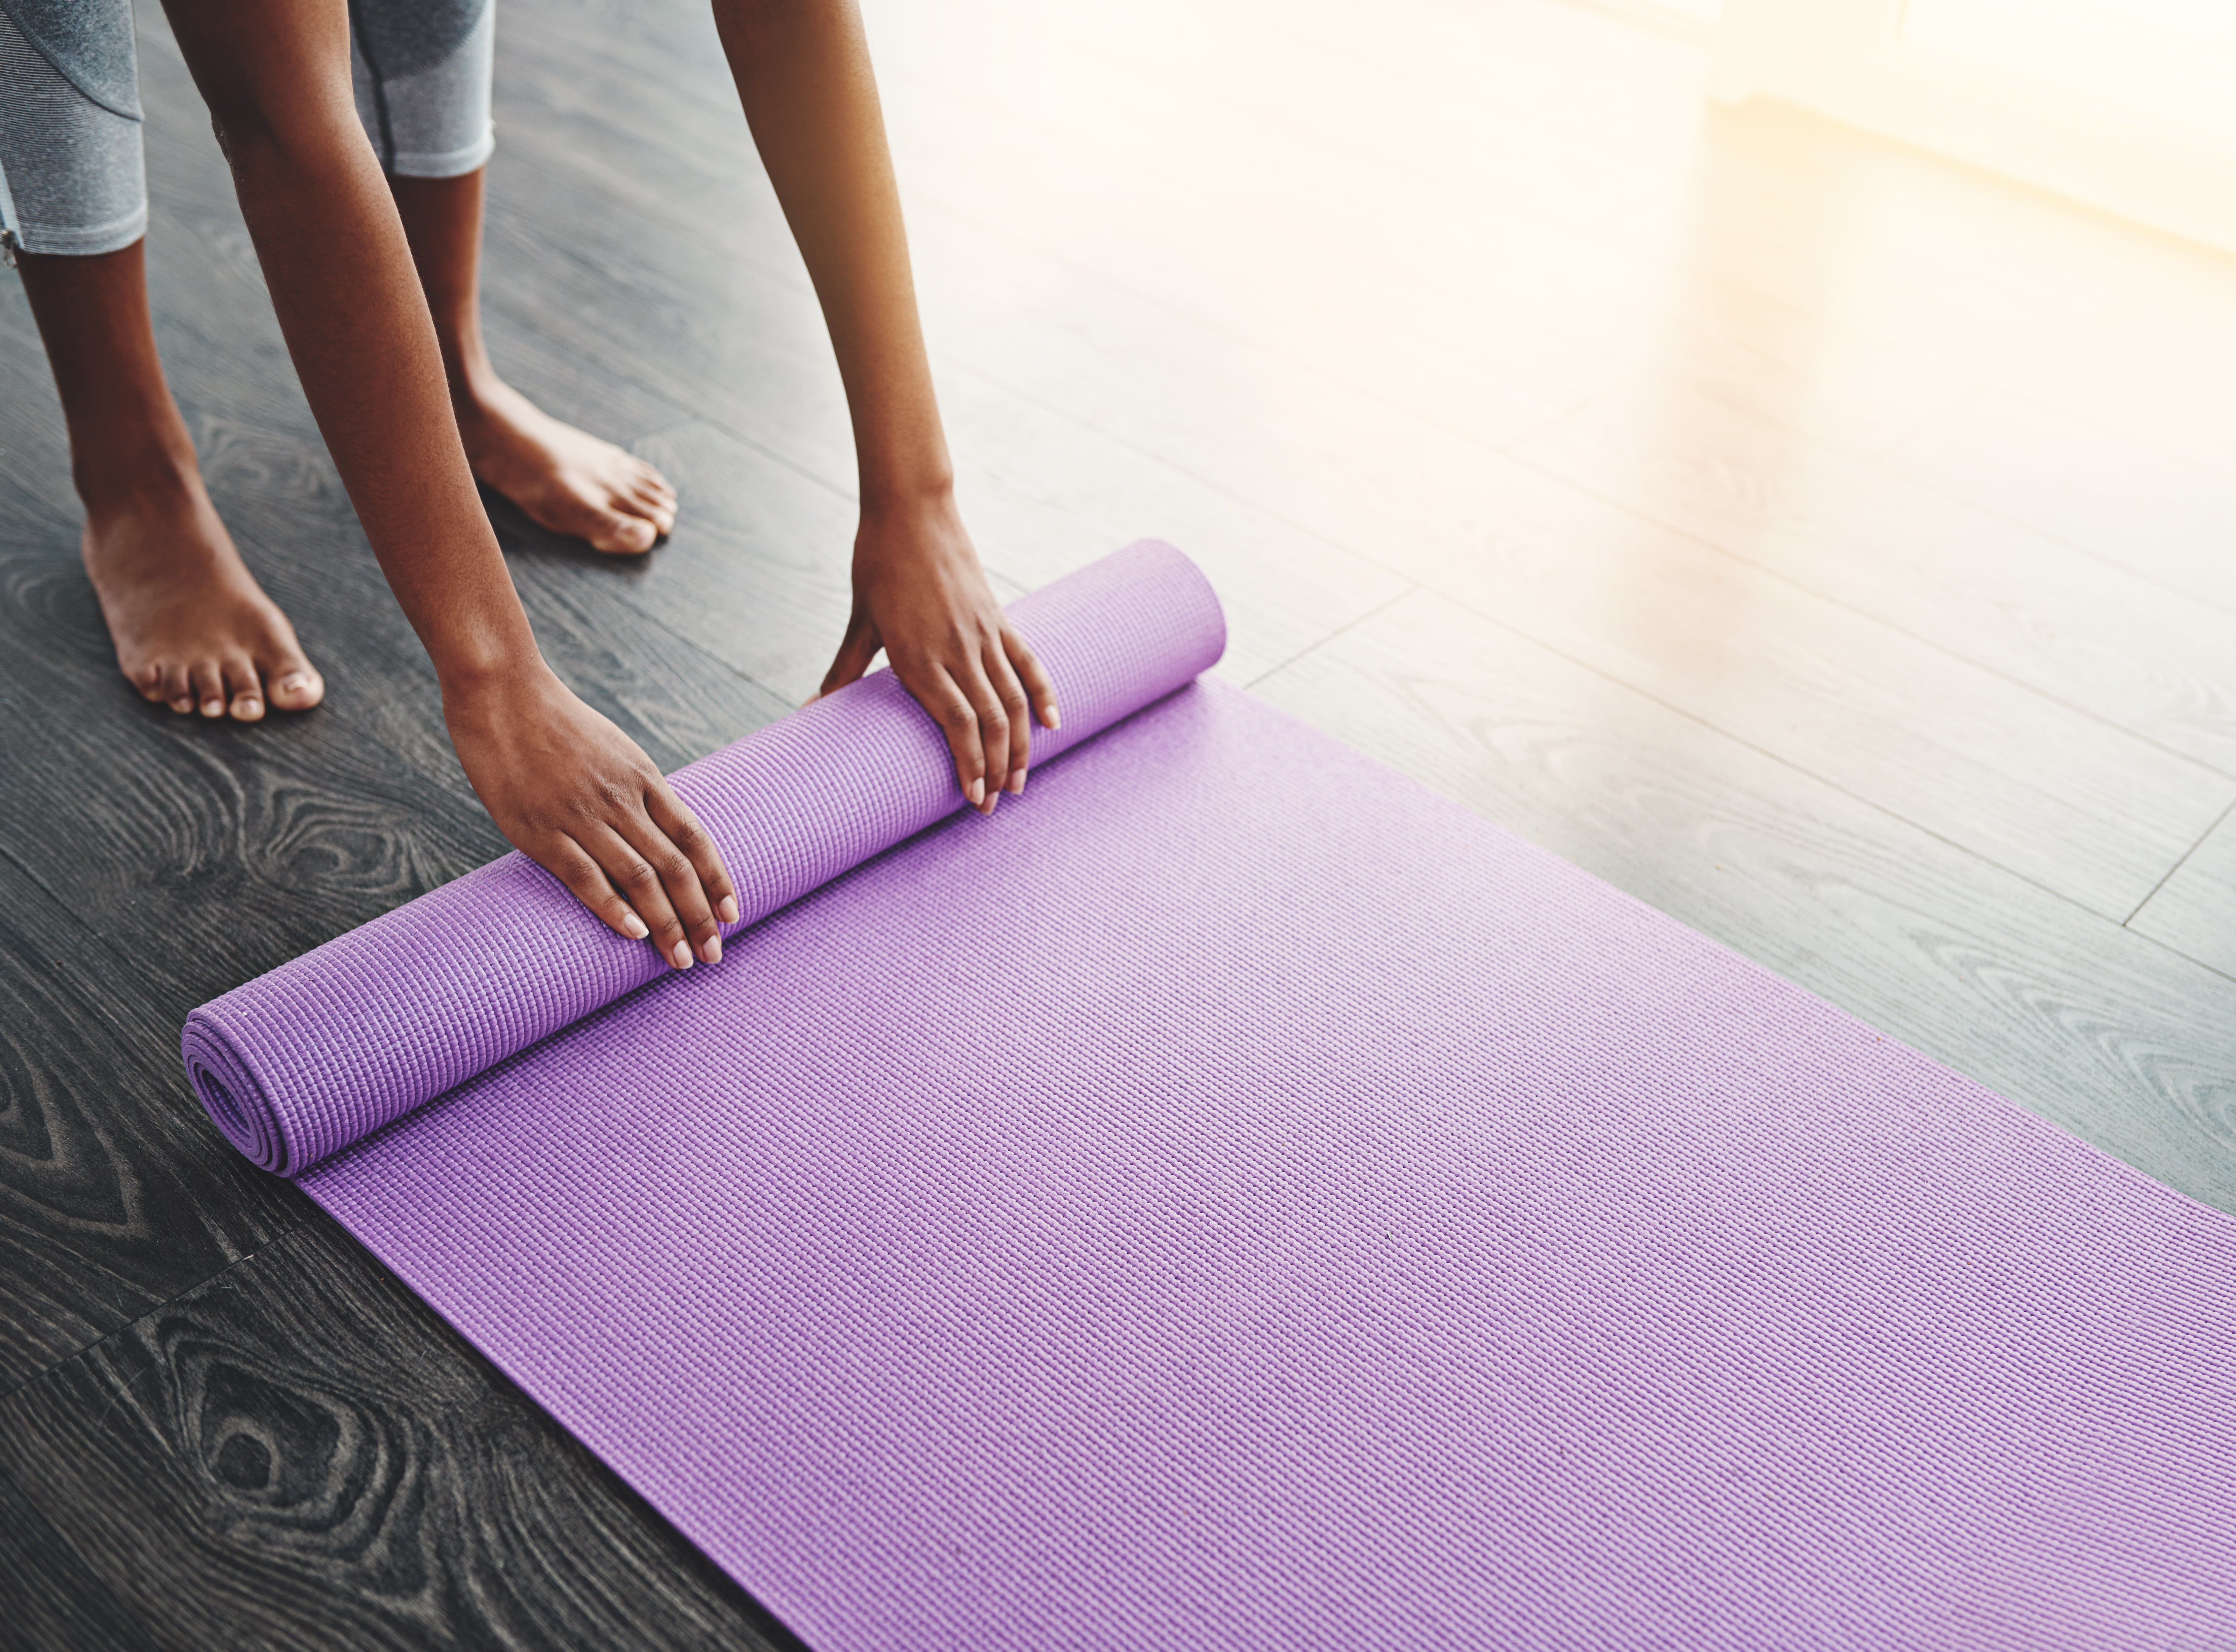 10 Tips to Make Your Yoga Mat Less Slippery –